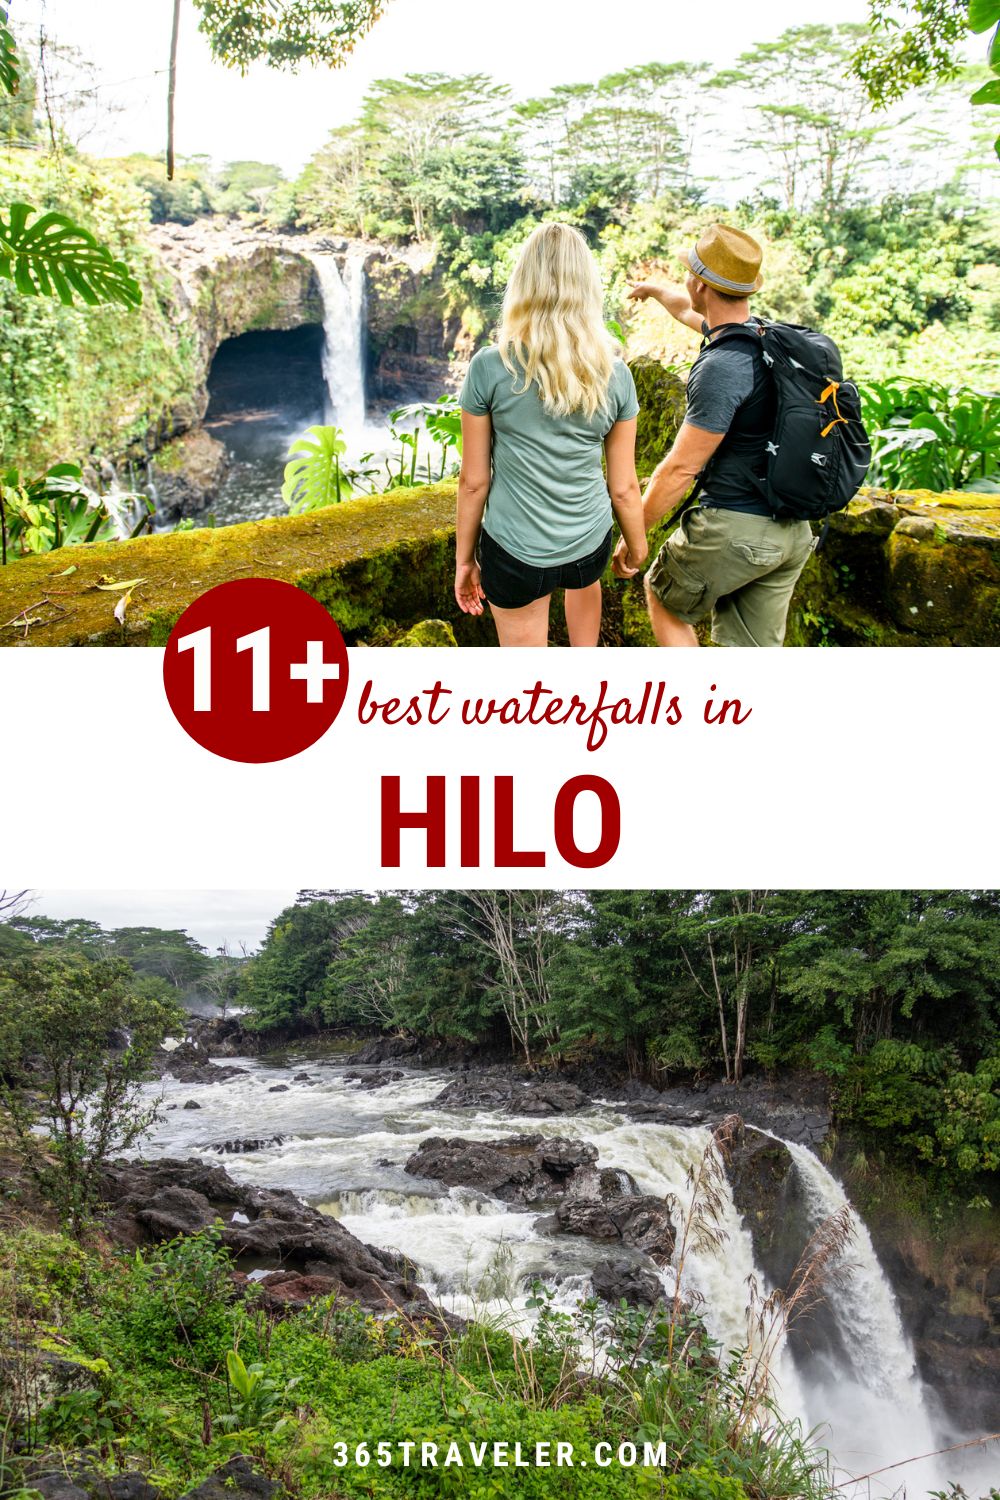 11+ BEST HILO WATERFALLS YOU DON'T WANT TO MISS